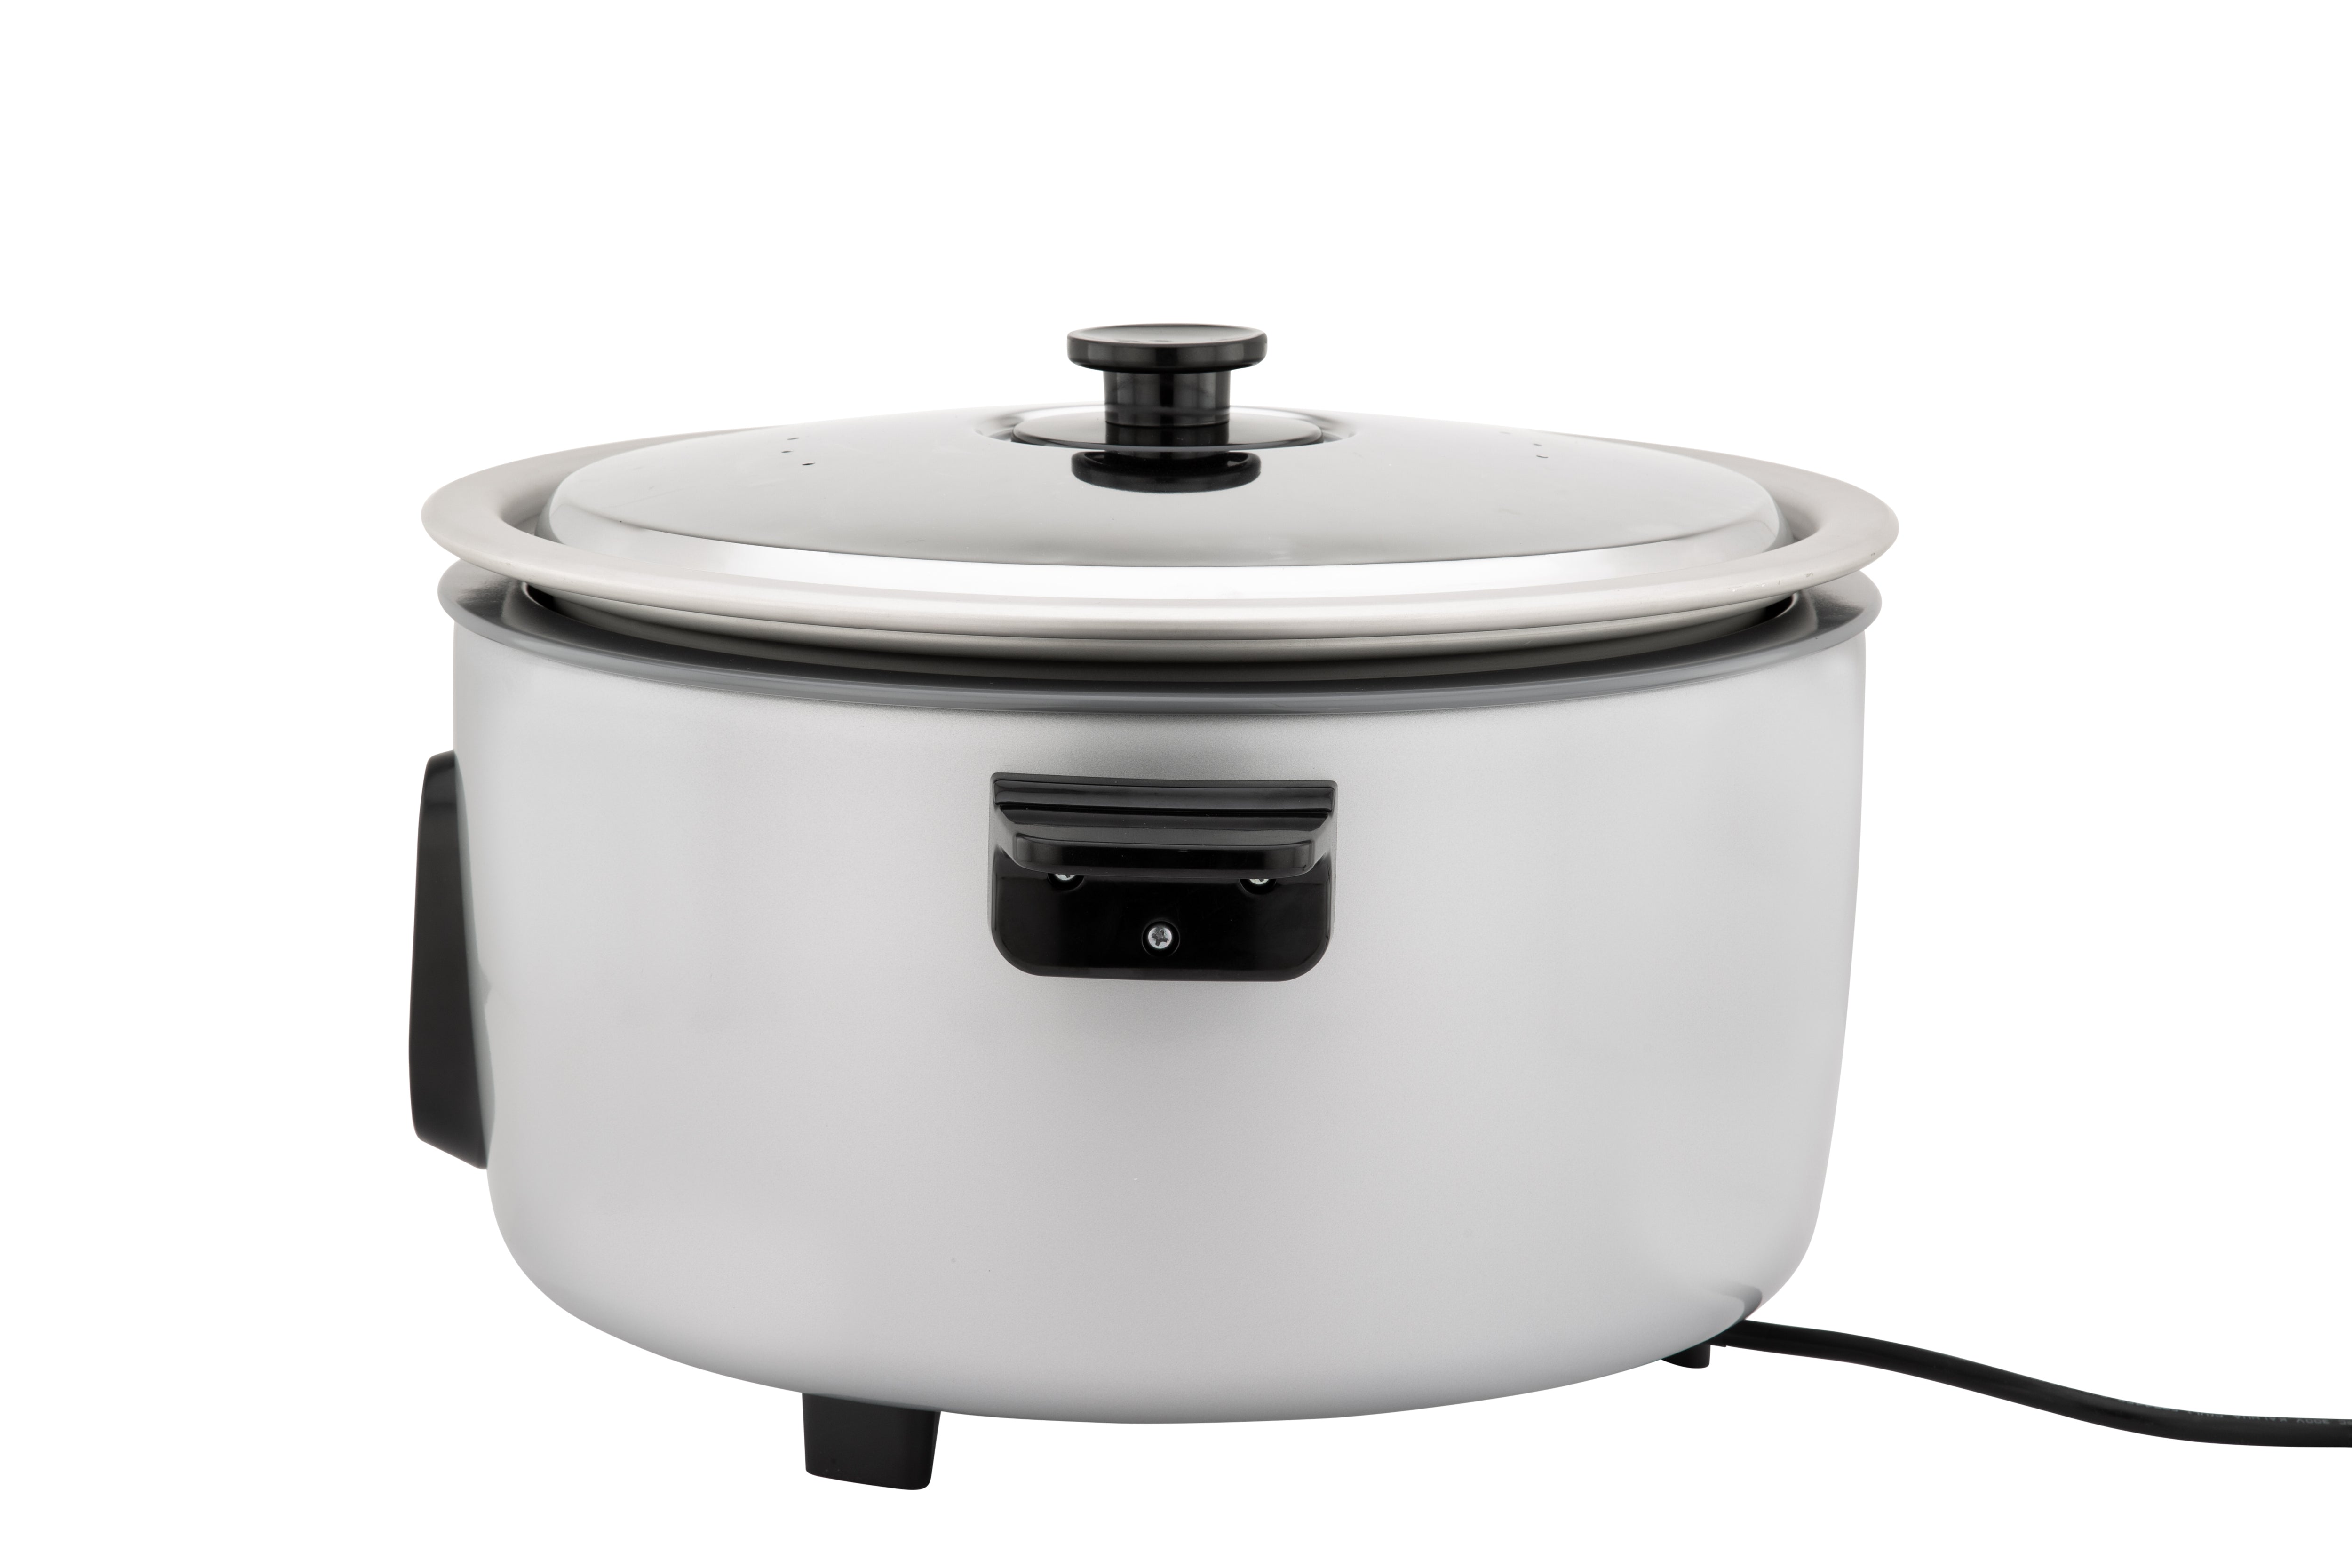  Panasonic Commercial Rice Cooker, Large Capacity 46